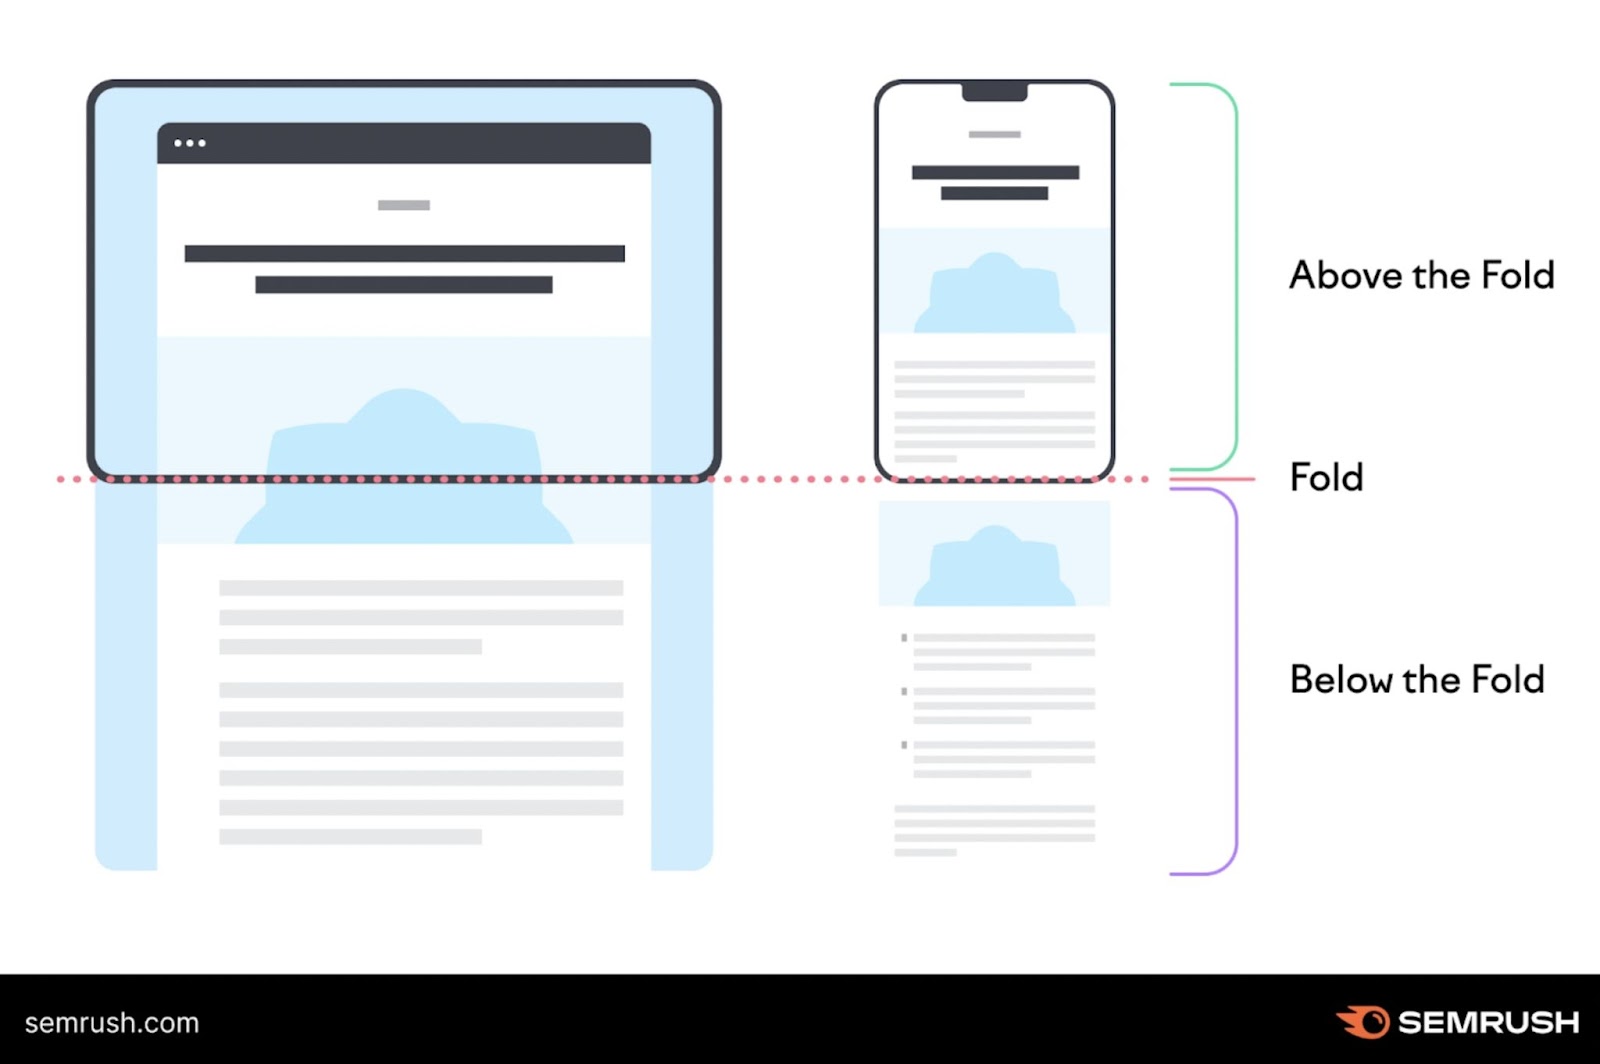 A visual showing where the "above the fold," and "below the fold" content is on desktop and mobile screens